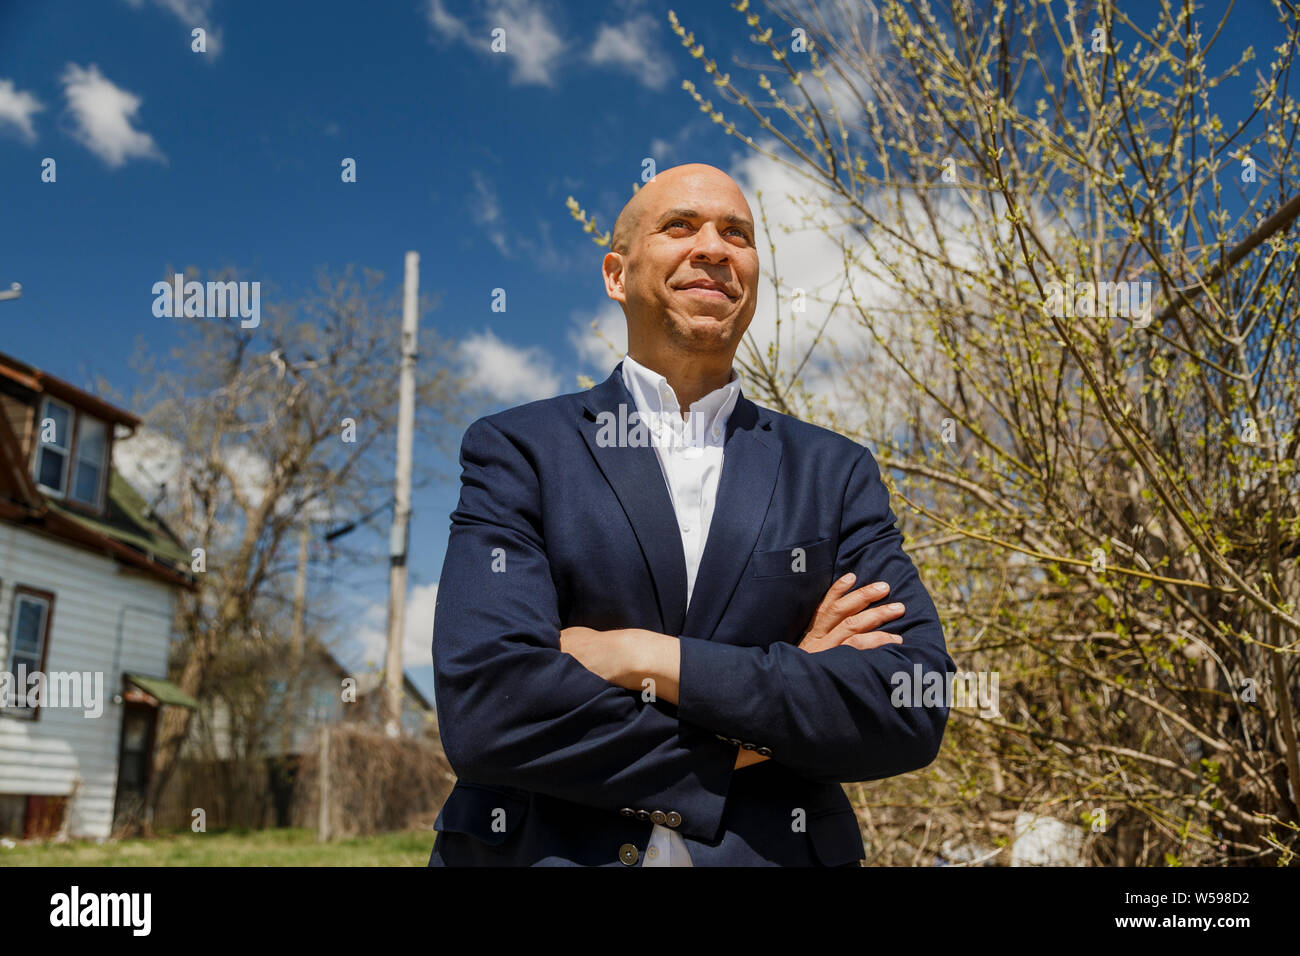 A portrait of Cory Booker, 2020 Democratic presidential candidate, April 2019. Stock Photo